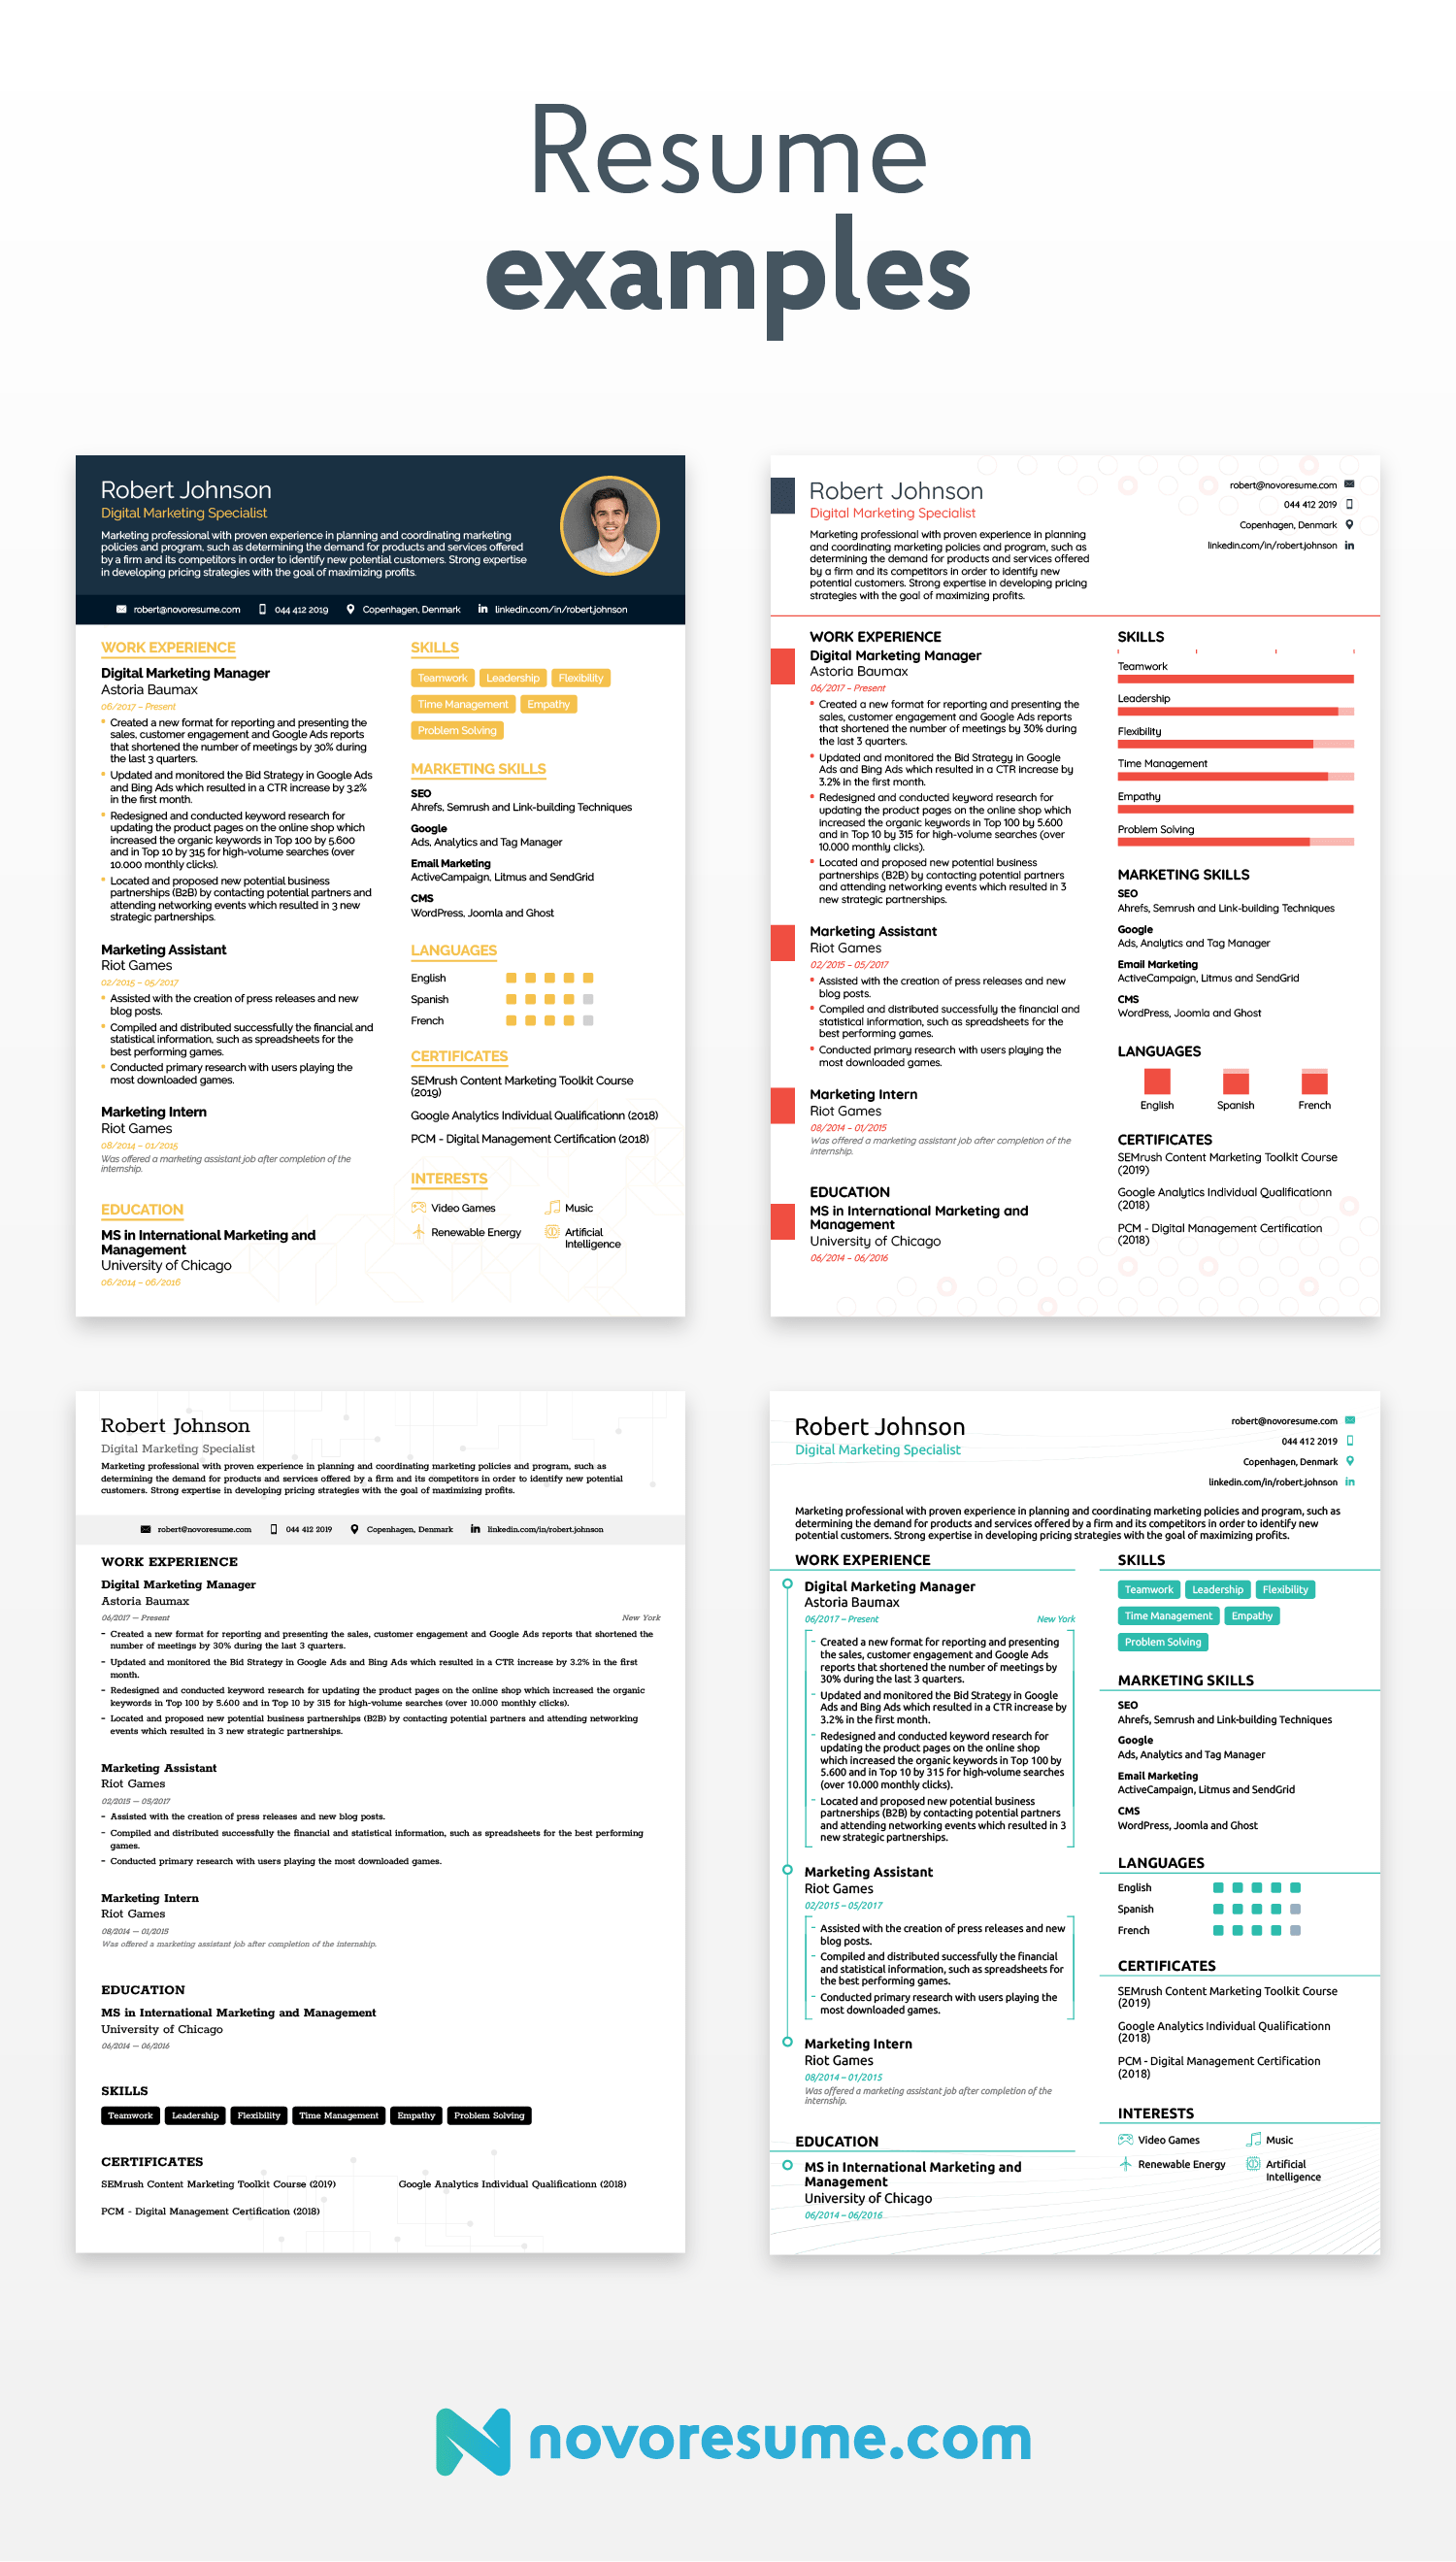 job search resume examples